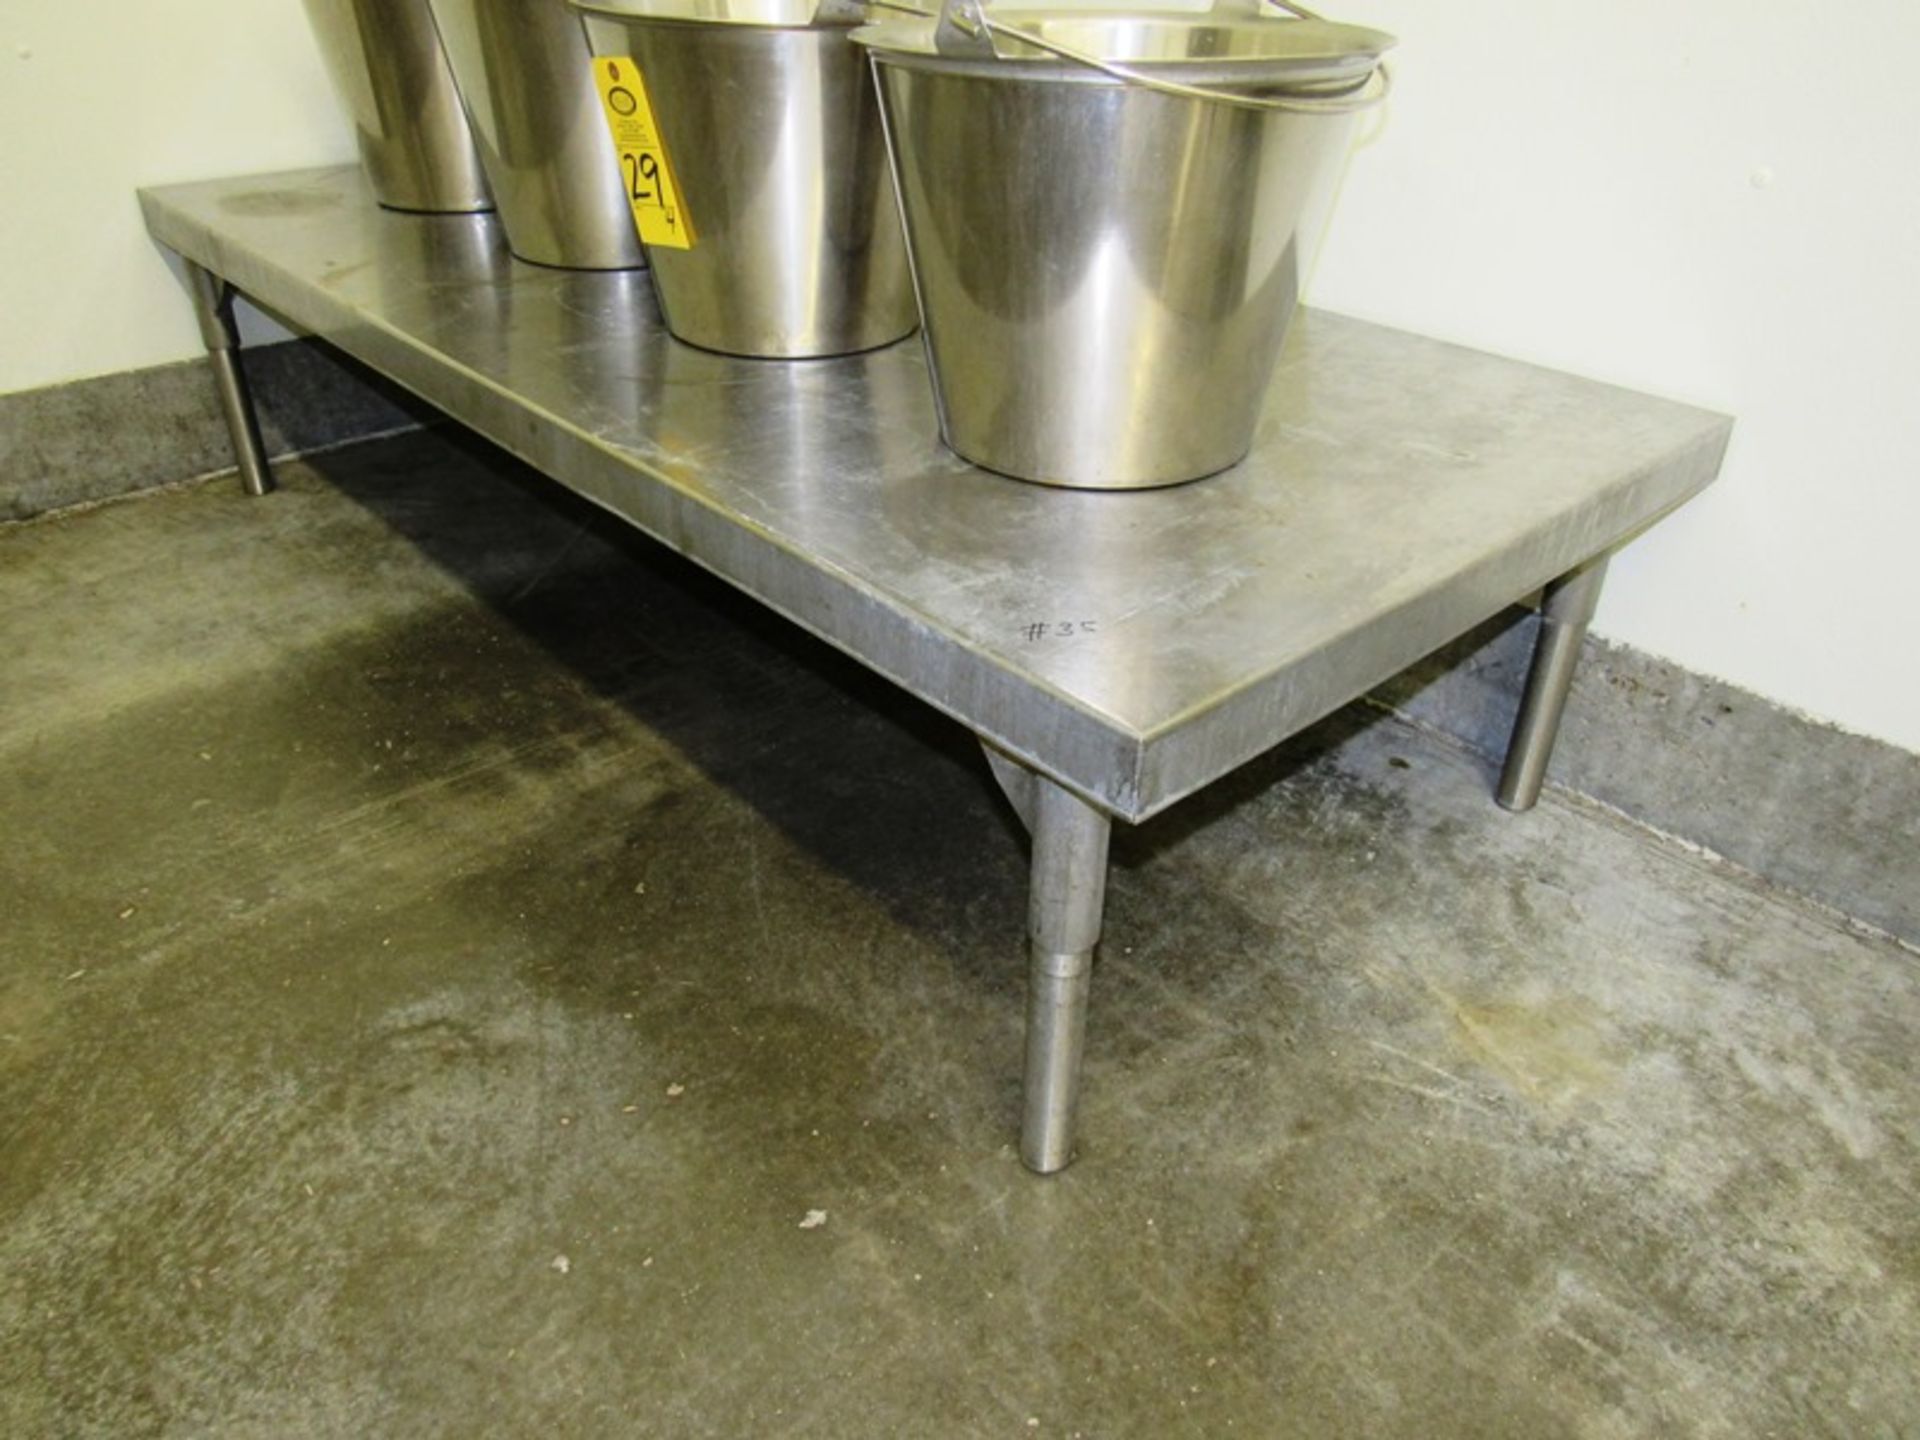 Stainless Steel Tables, 30" W X 6' L X 17" T (Removal Begins July 5th) Loading Fee $35 Rigger: - Image 2 of 2